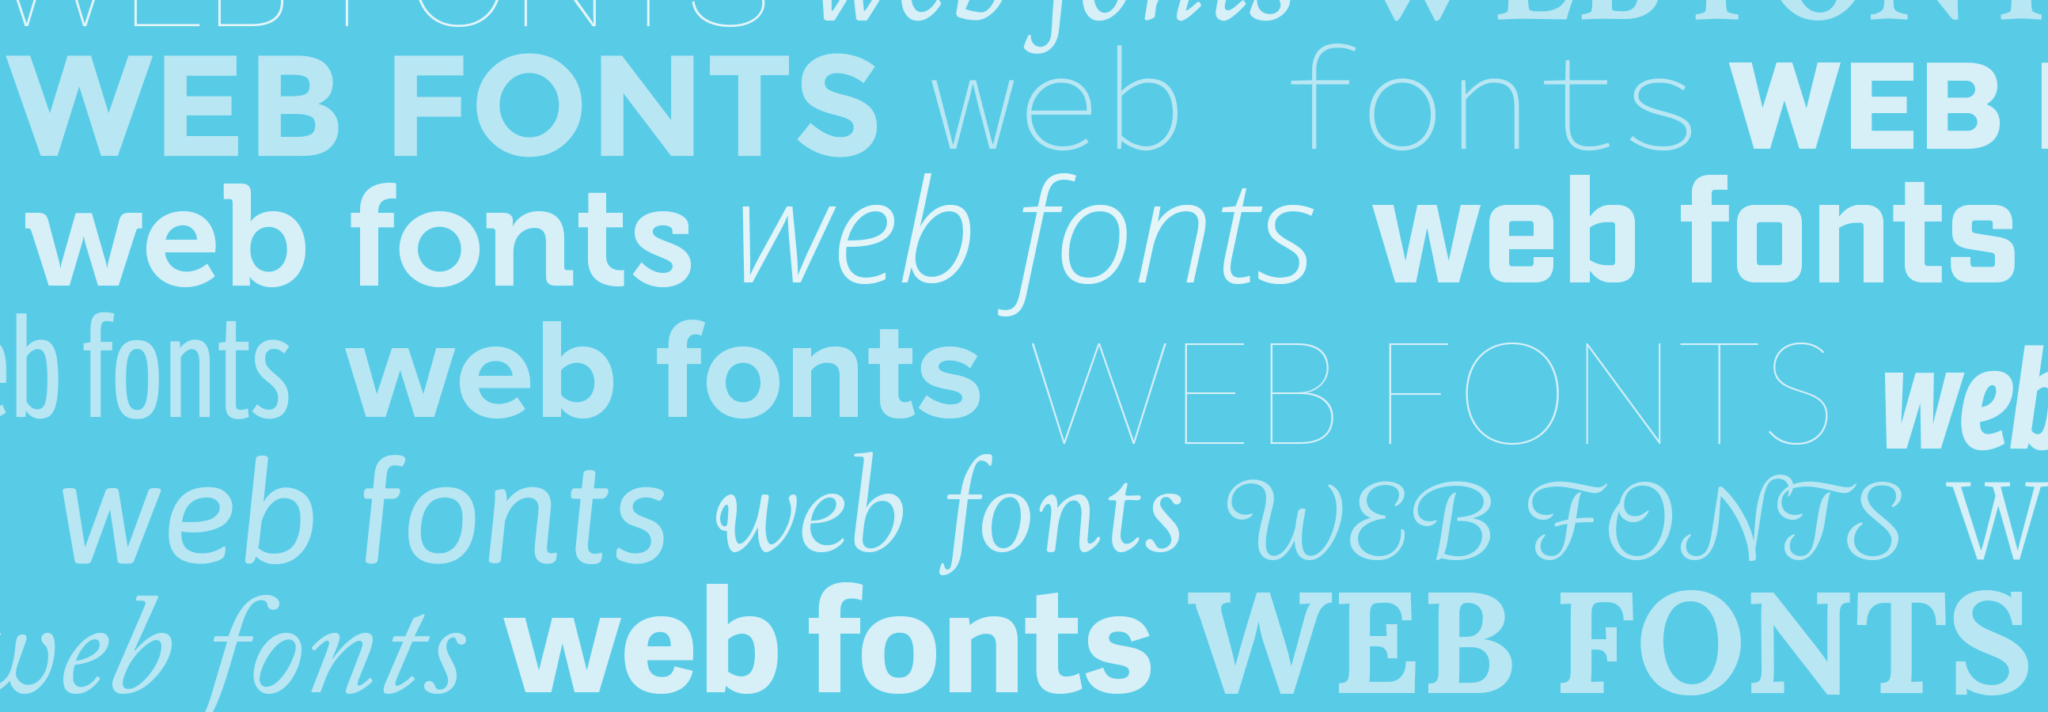 Web Fonts – Because Arial and Helvetica Are Boring